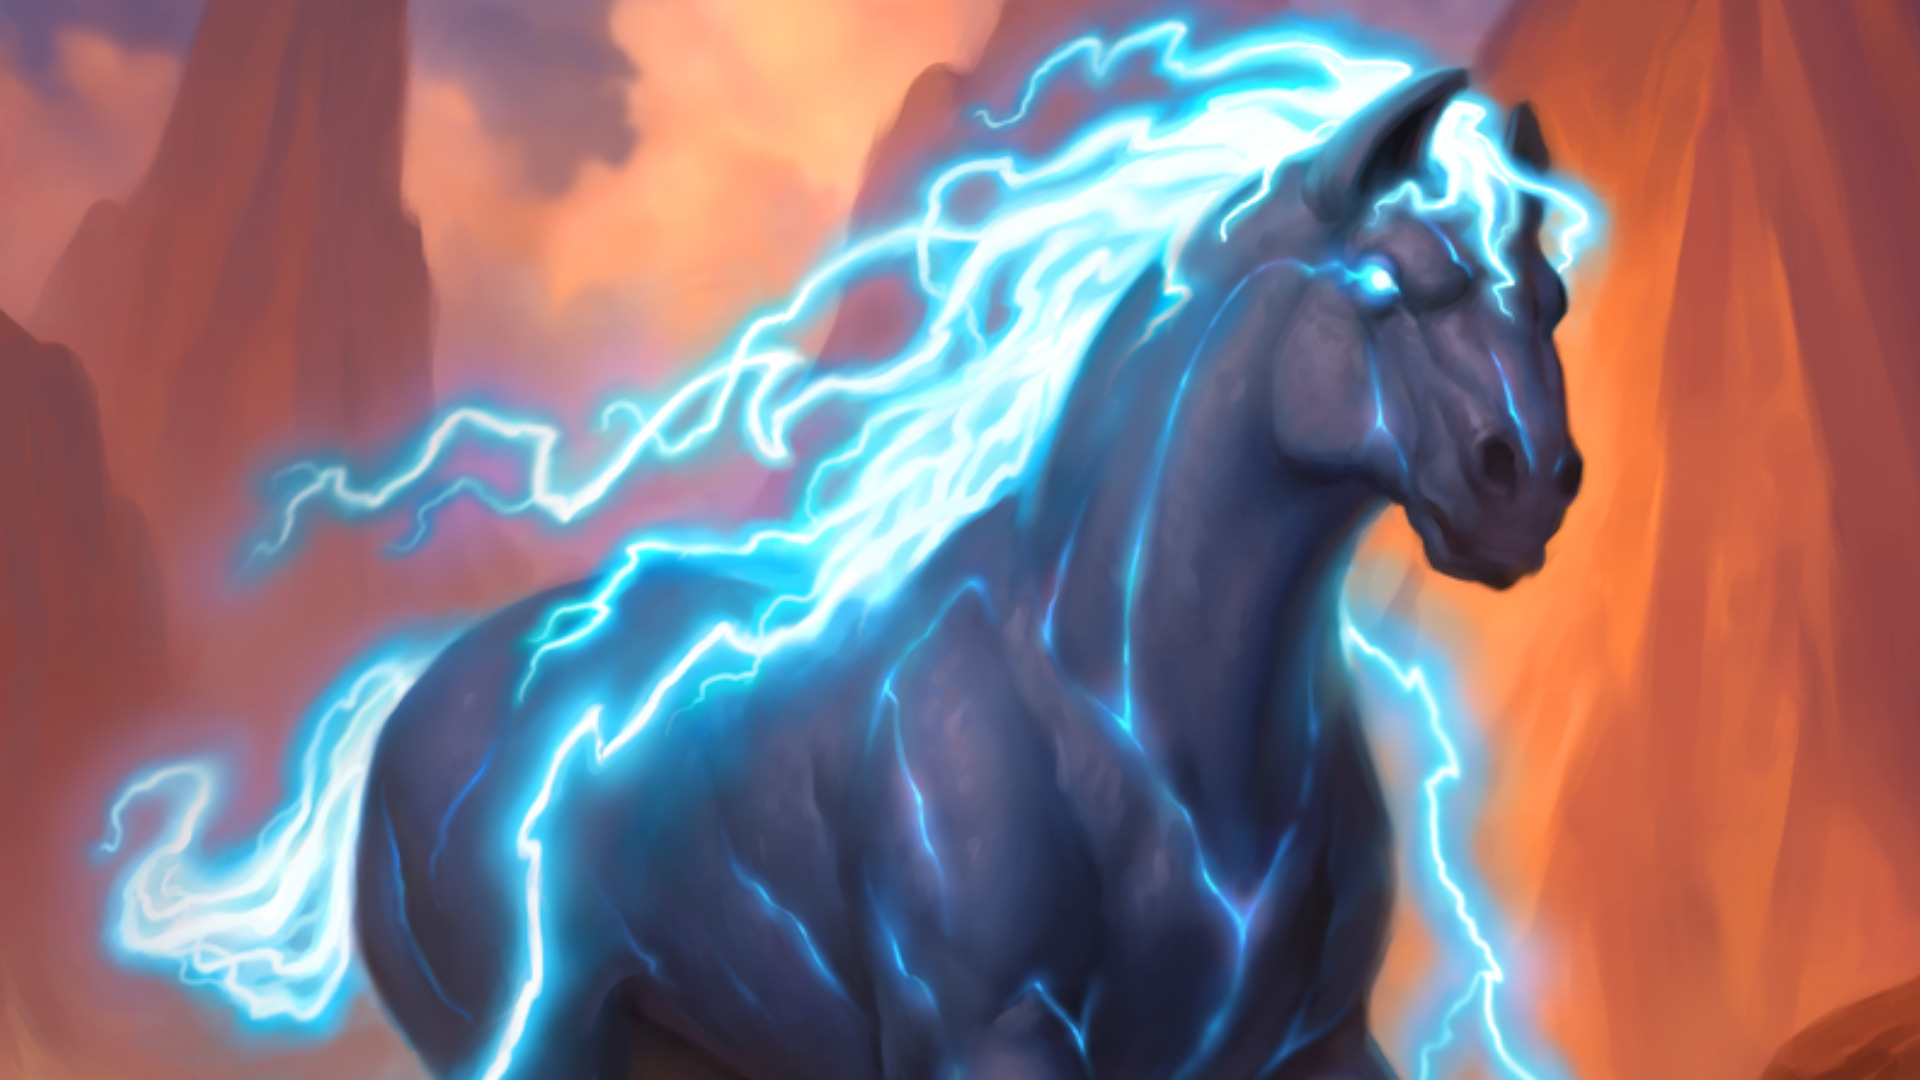 Hearthstone welcomes new cards and Keywords in its Wild West-themed Showdown  in the Badlands update